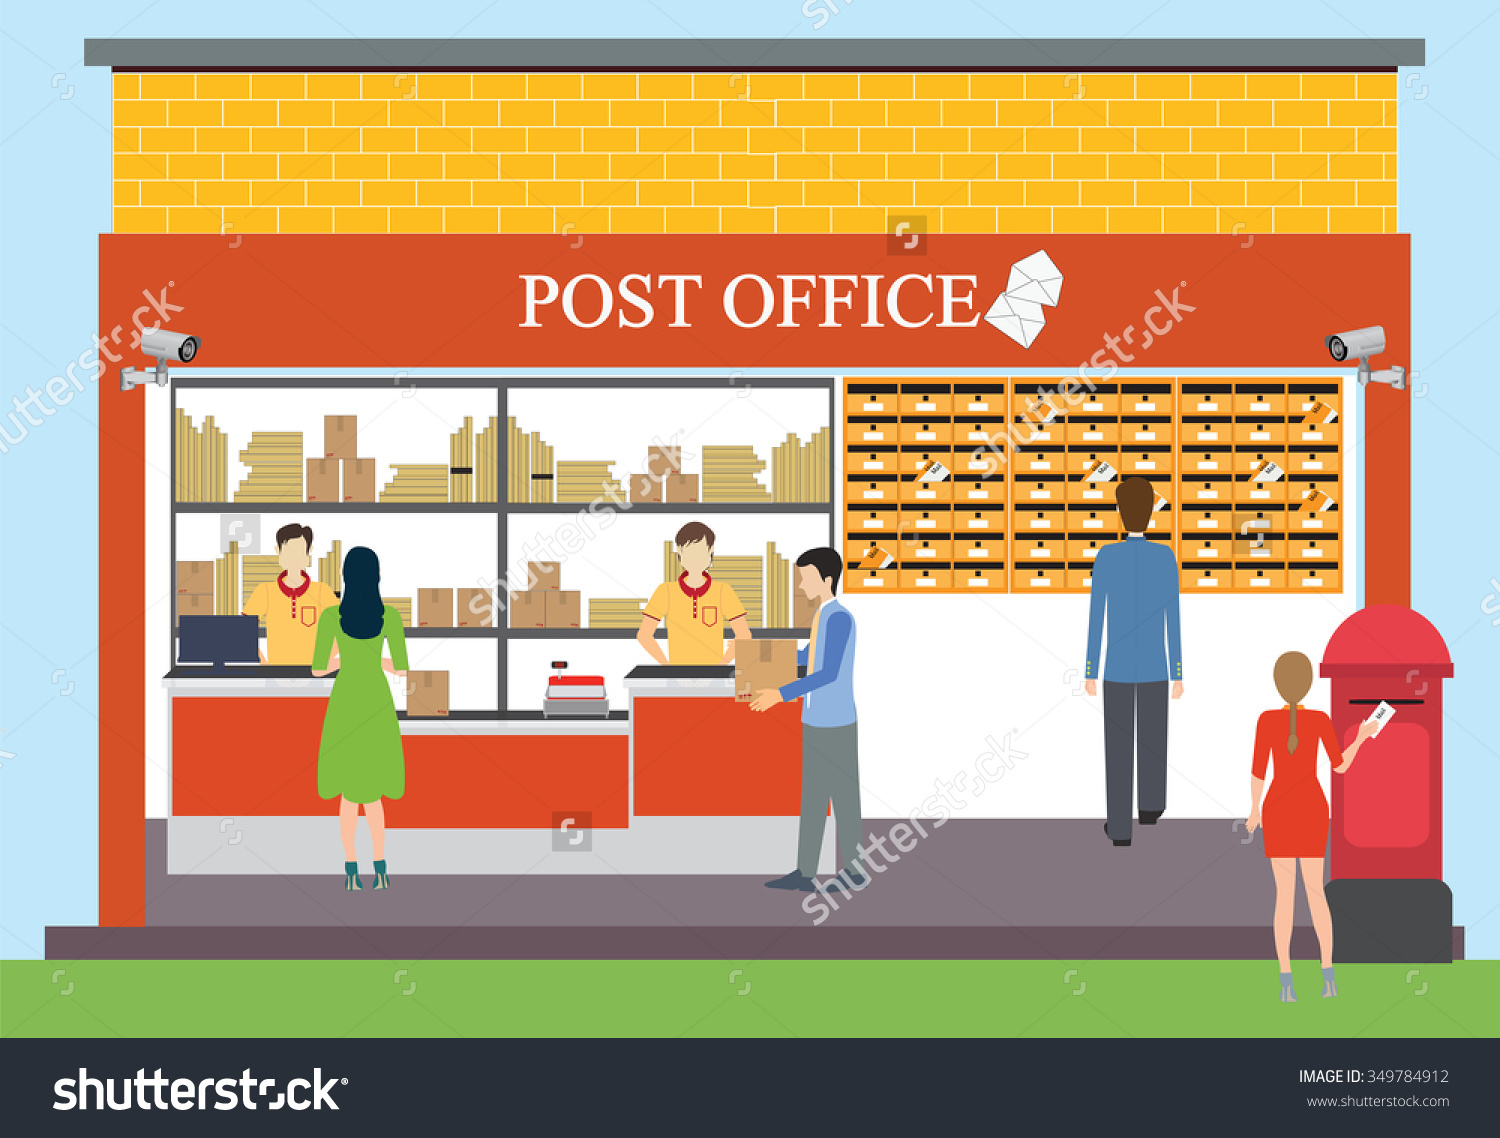 Building station . Buildings clipart post office